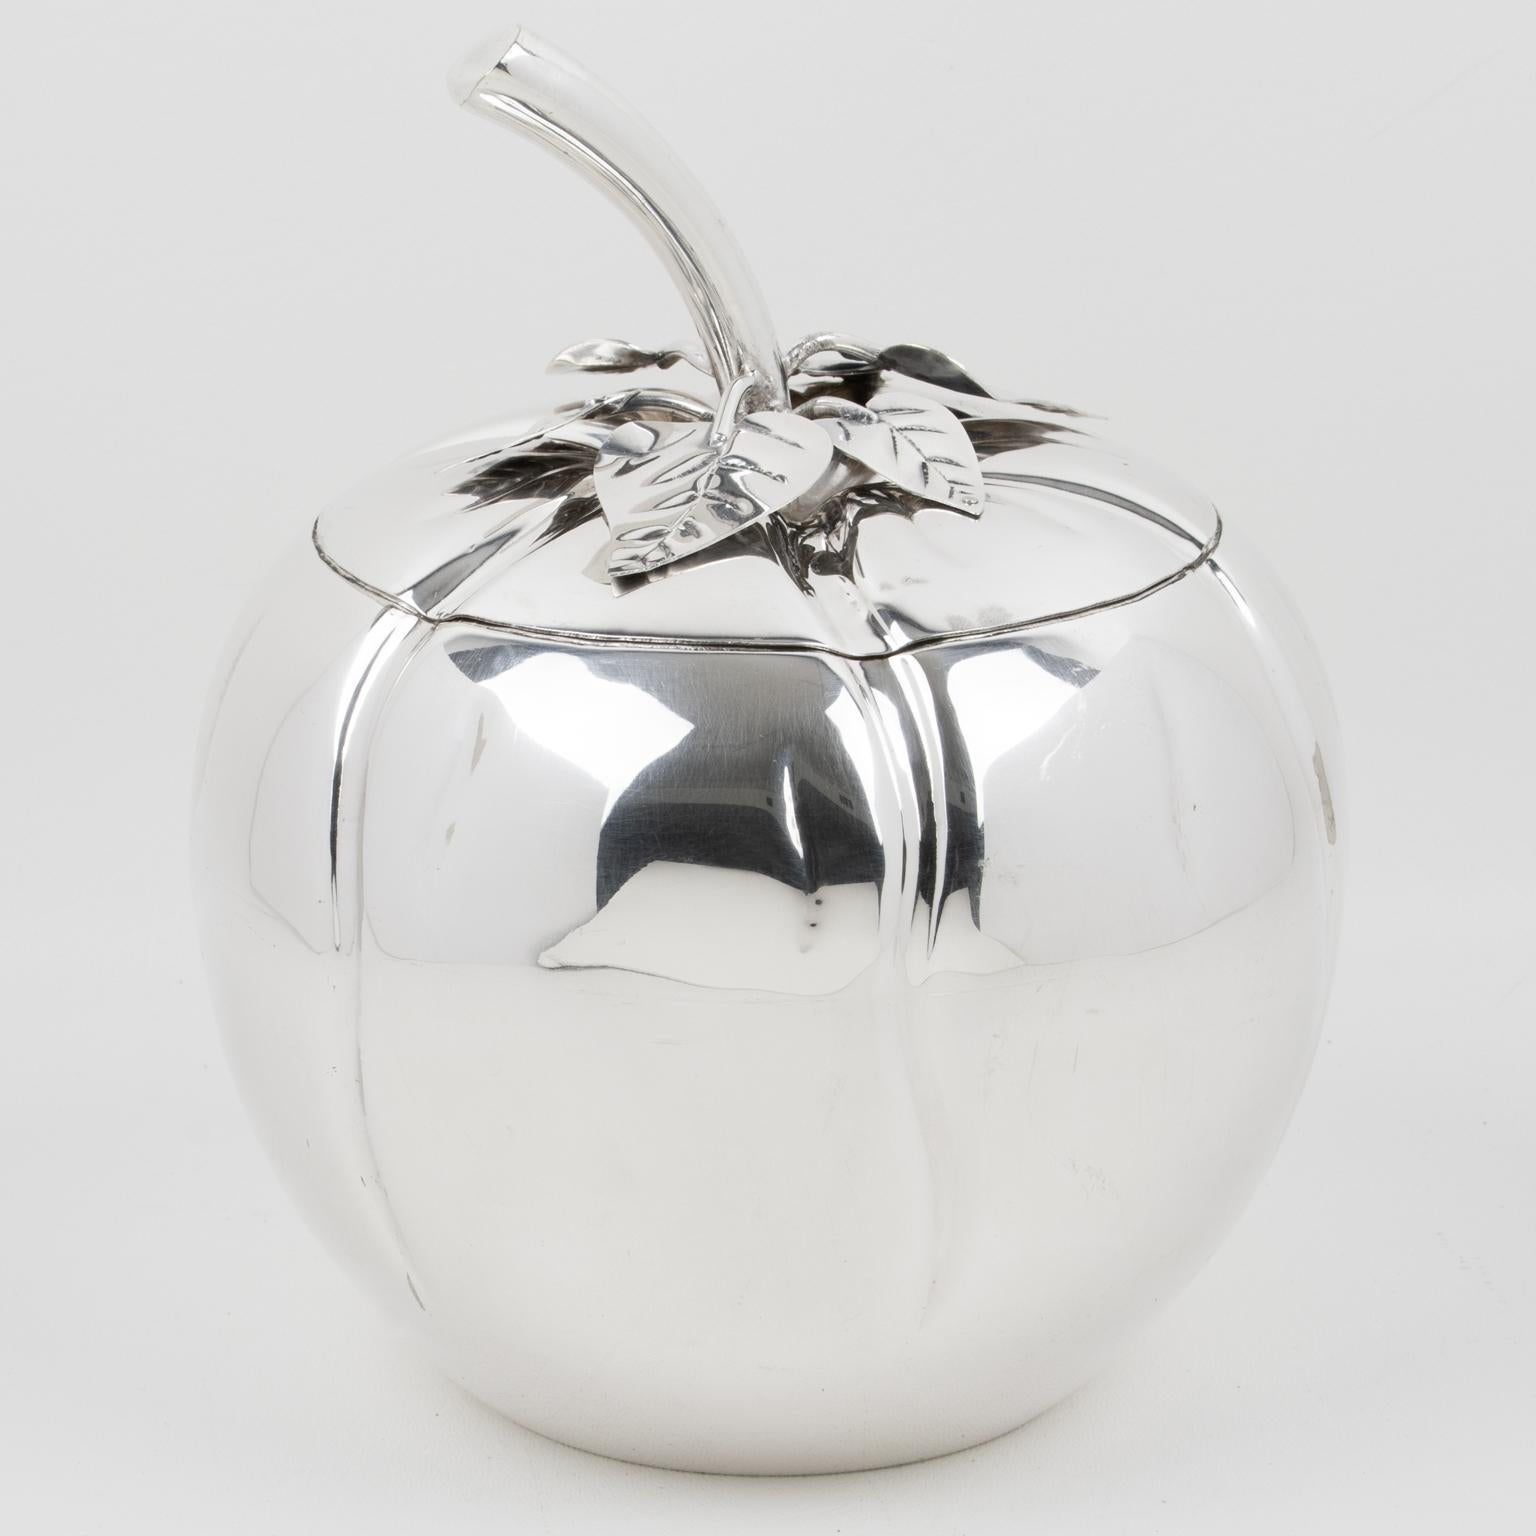 Teghini Firenze designed this lovely modernist silver plate ice bucket in the 1980s. The piece features a rounded shape with an oversized stylized tomato design with a lid and a strainer insert. There is no visible maker's mark.
The ice bucket is in